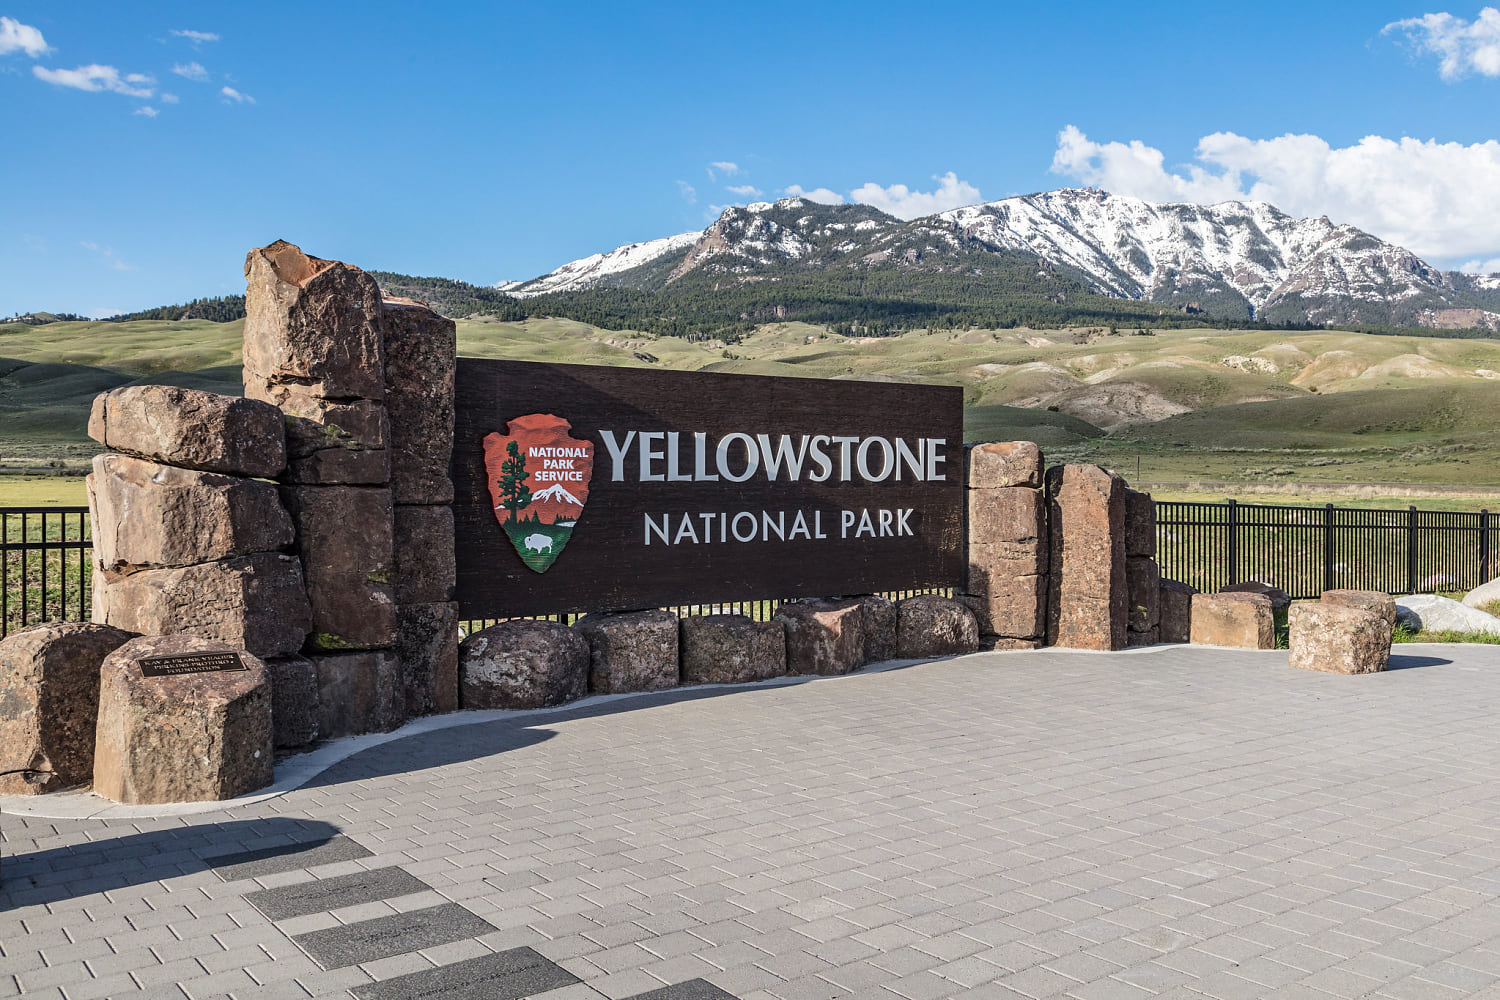 Man fatally shot by Yellowstone rangers on July Fourth allegedly threatened mass shooting, officials say